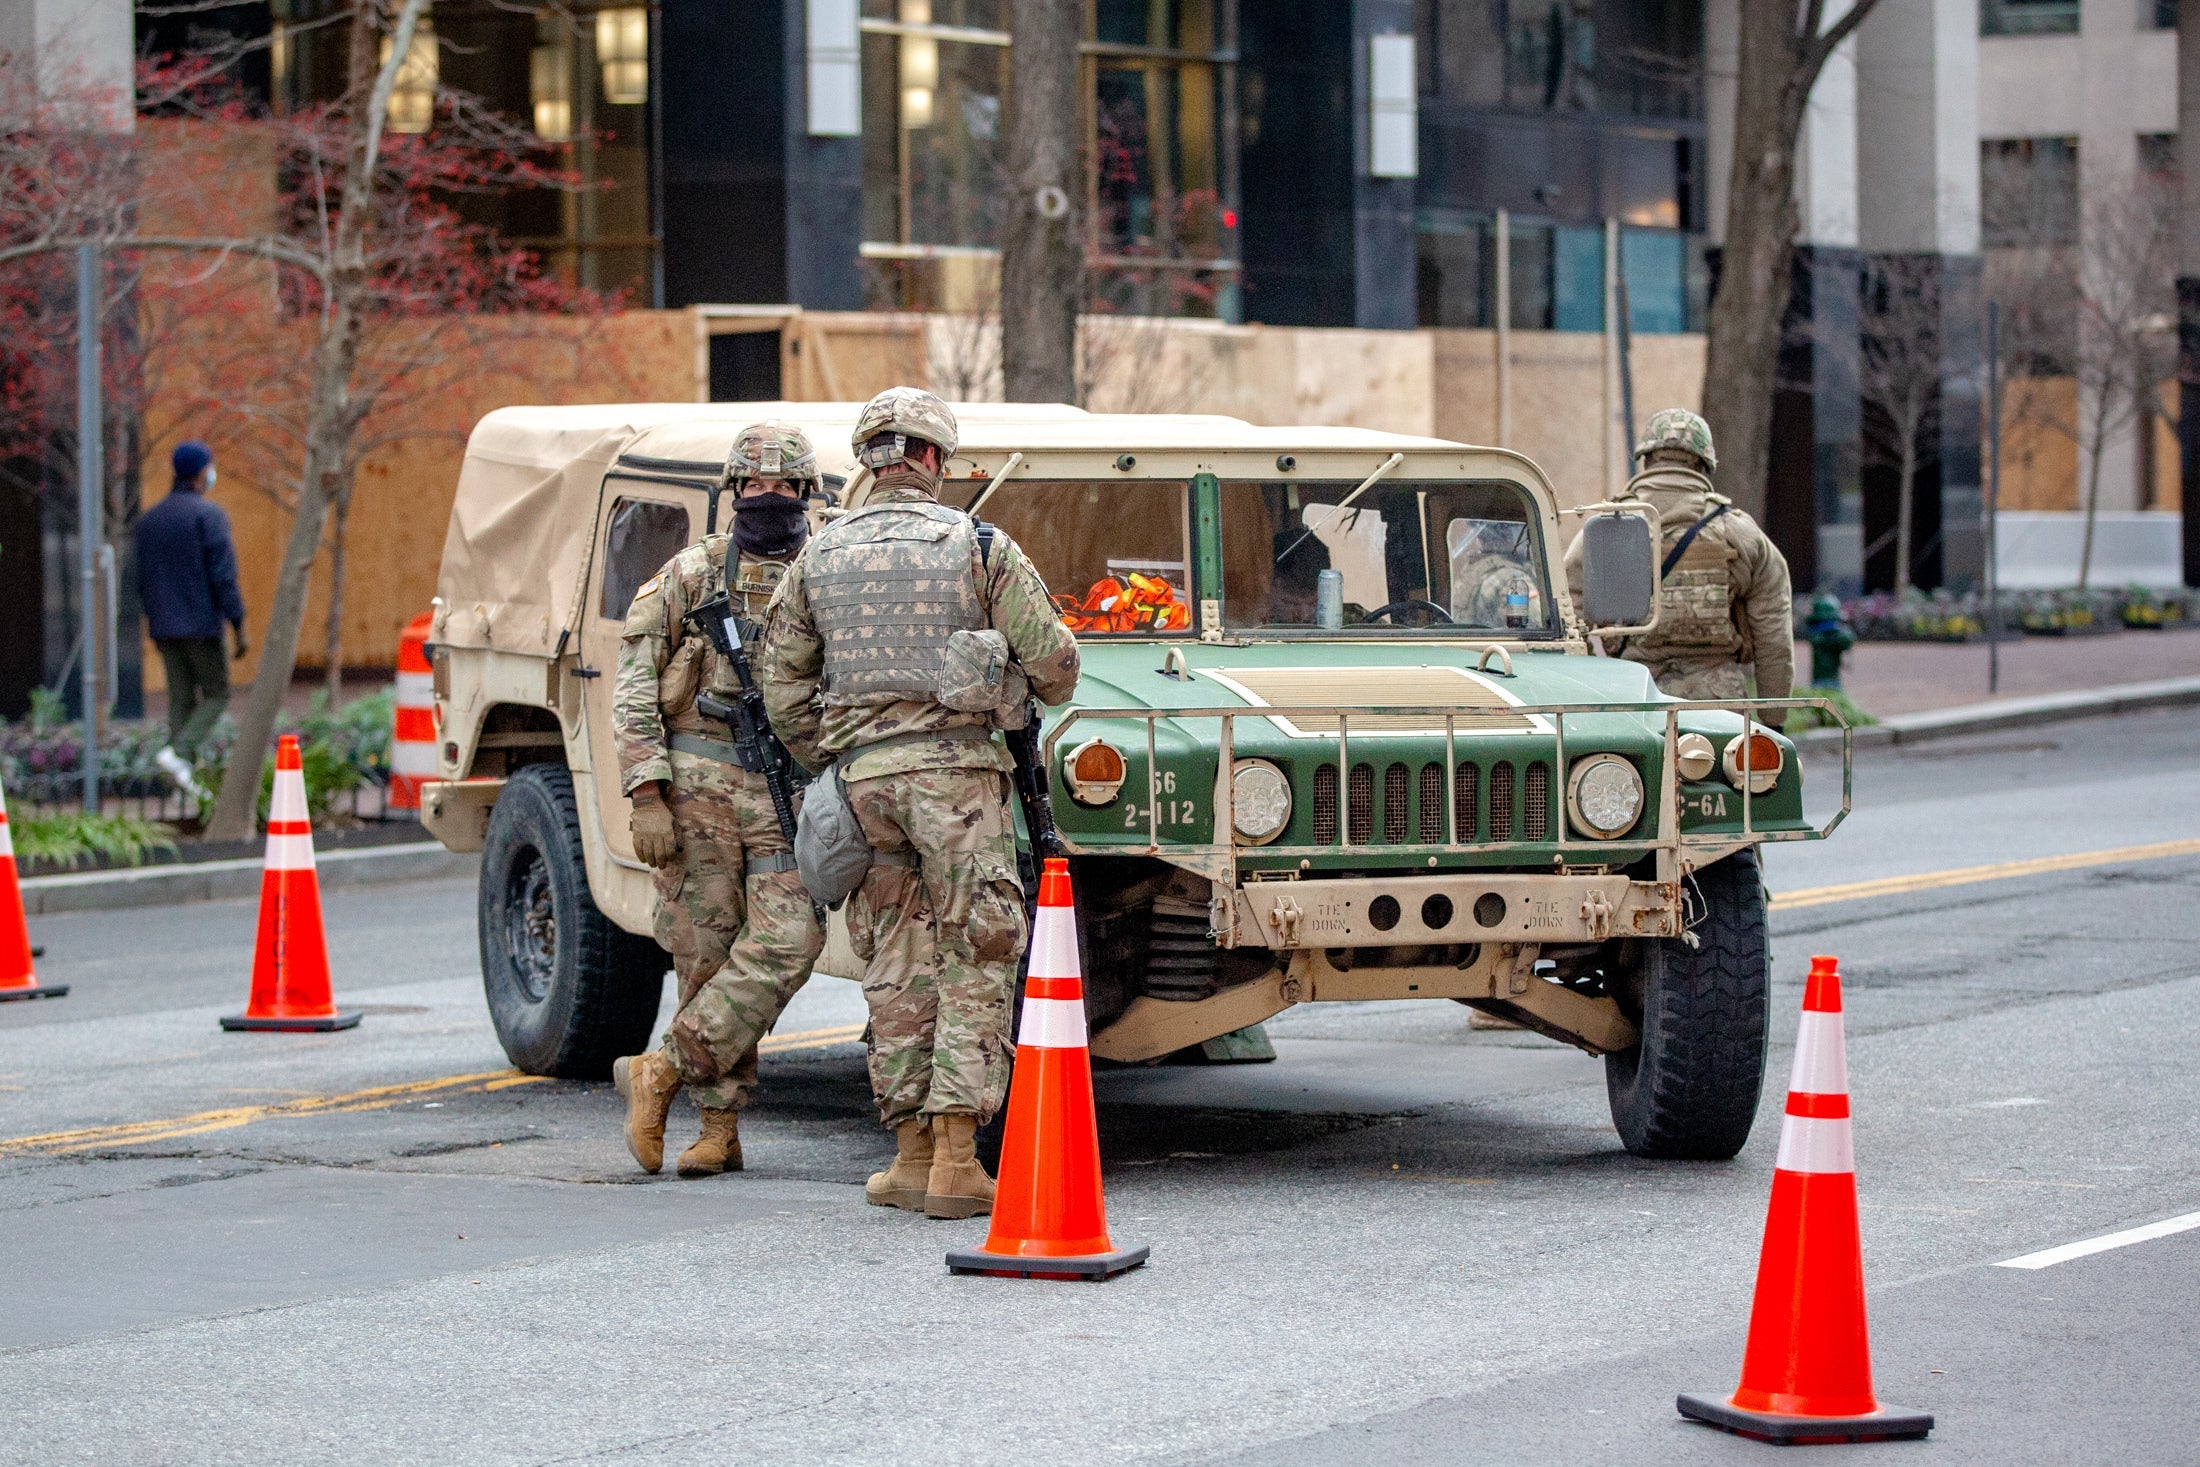 National Guard members in camo stand by a Humvee in the middle of a city street